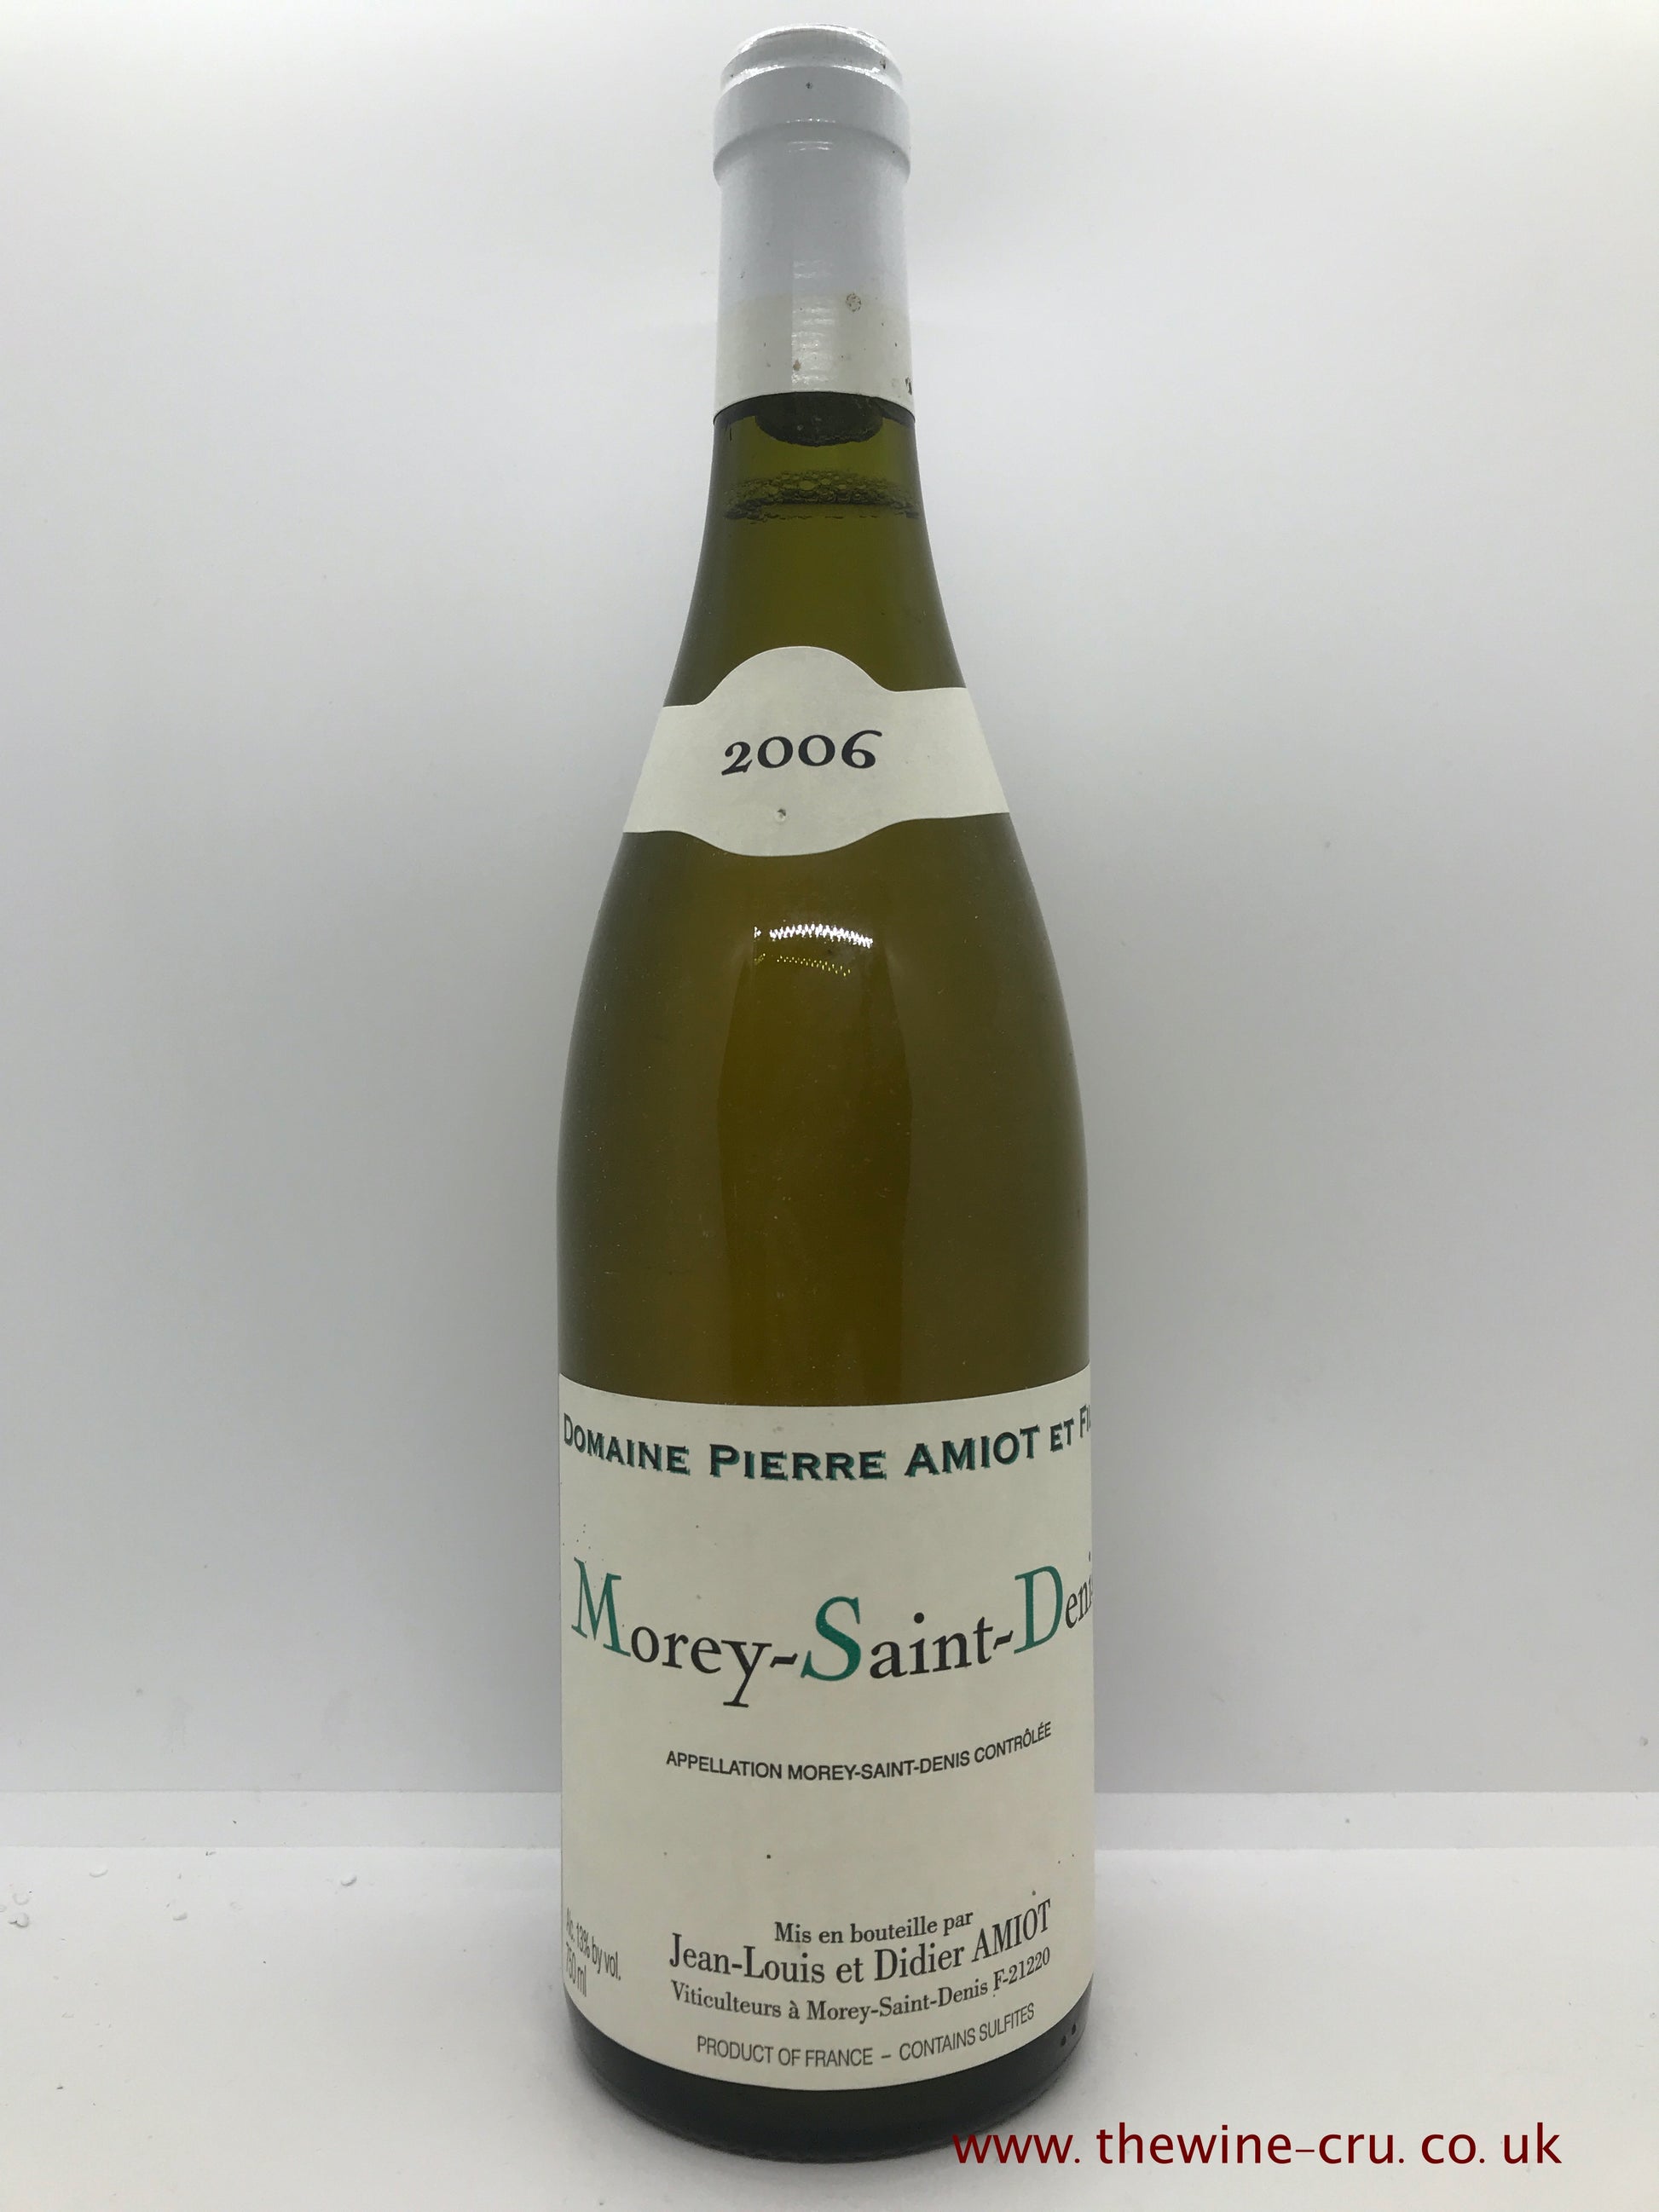 2006 vintage white wine. Morey Saint Denis Blanc Domaine Pierre Amoit & Fils 2006. France Burgundy. Immediate delivery. Free local delivery. Gift wrapping available.